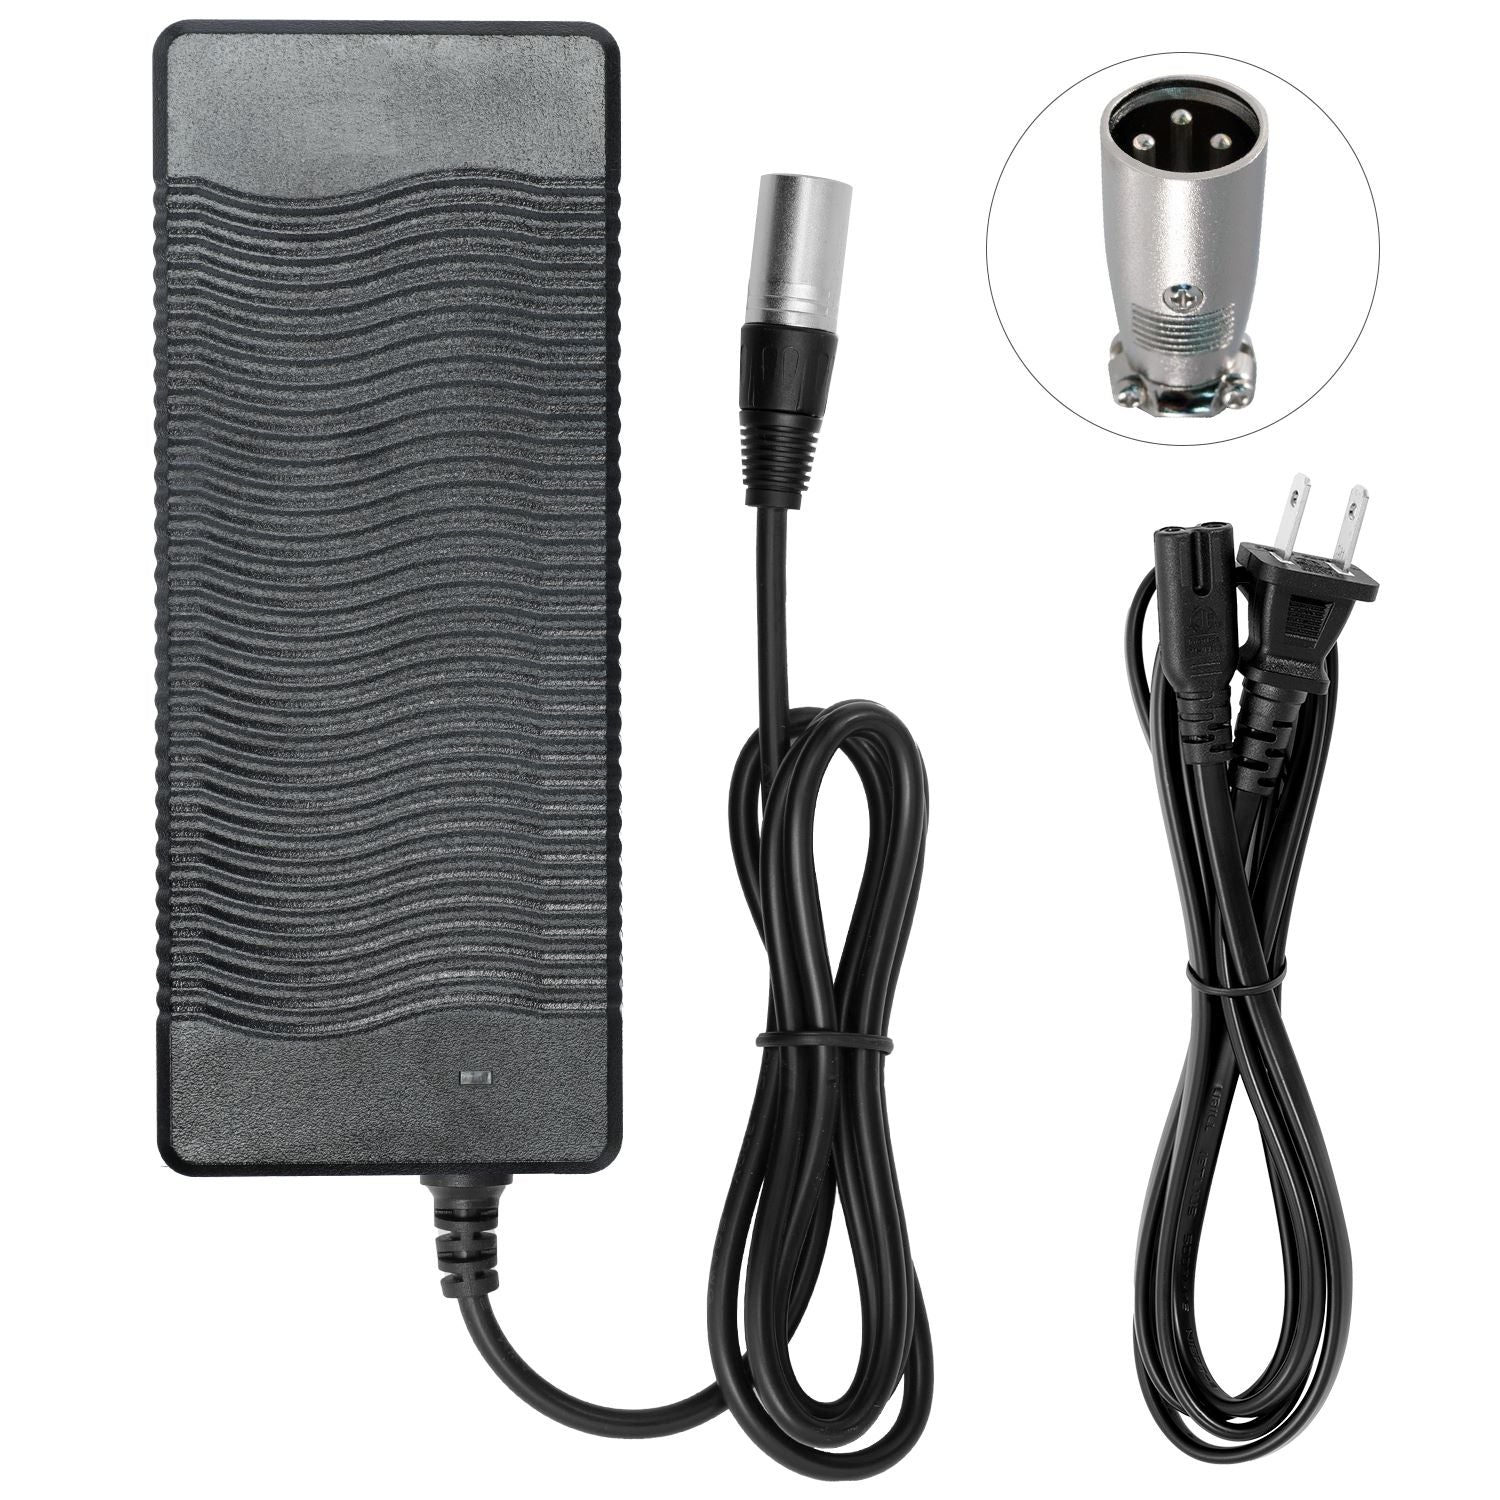 Charger for Pedego Stretch eBike